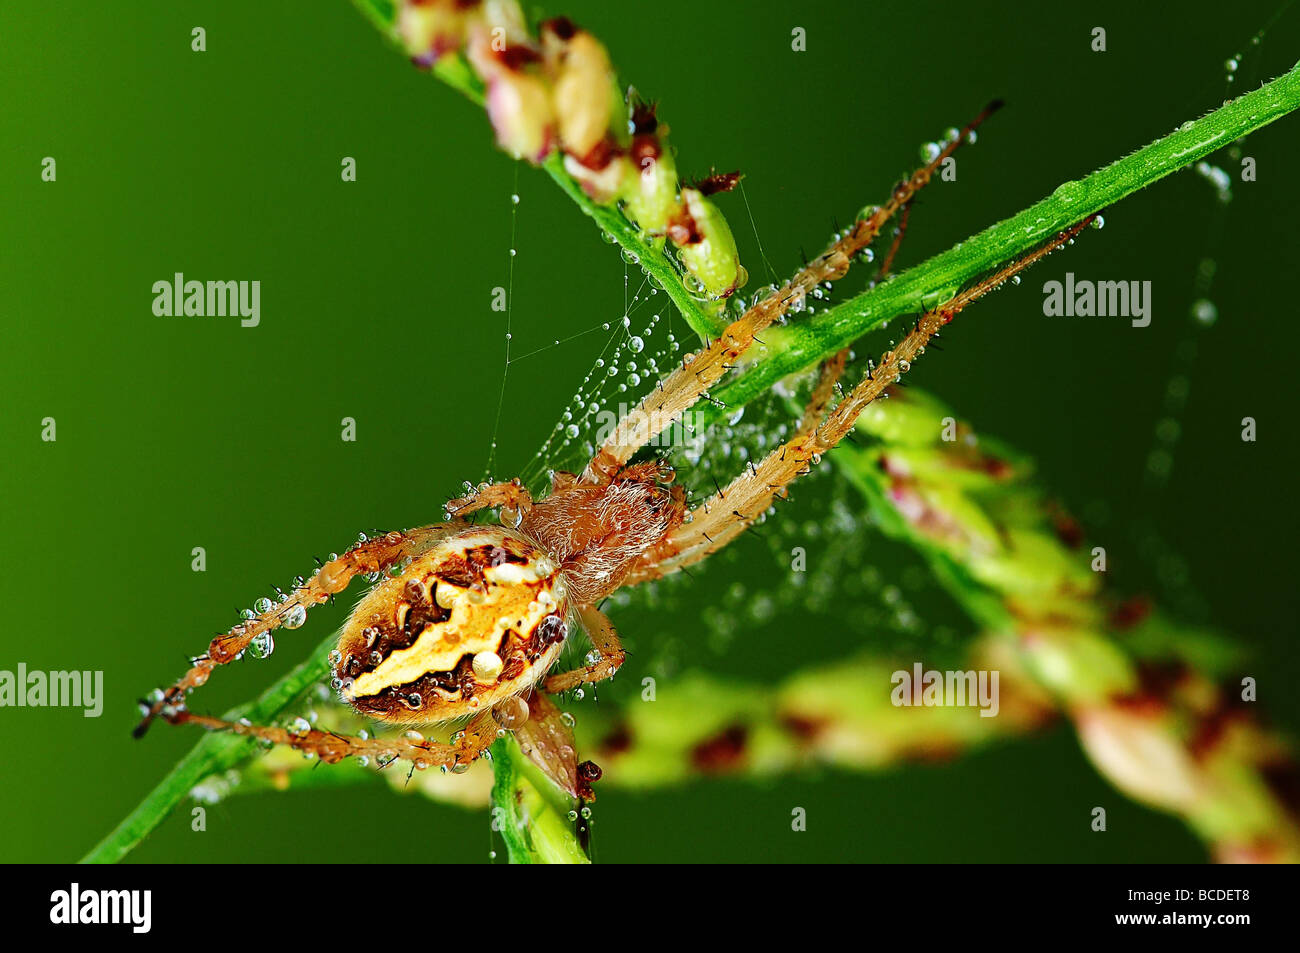 brown legged spider in the parks Stock Photo